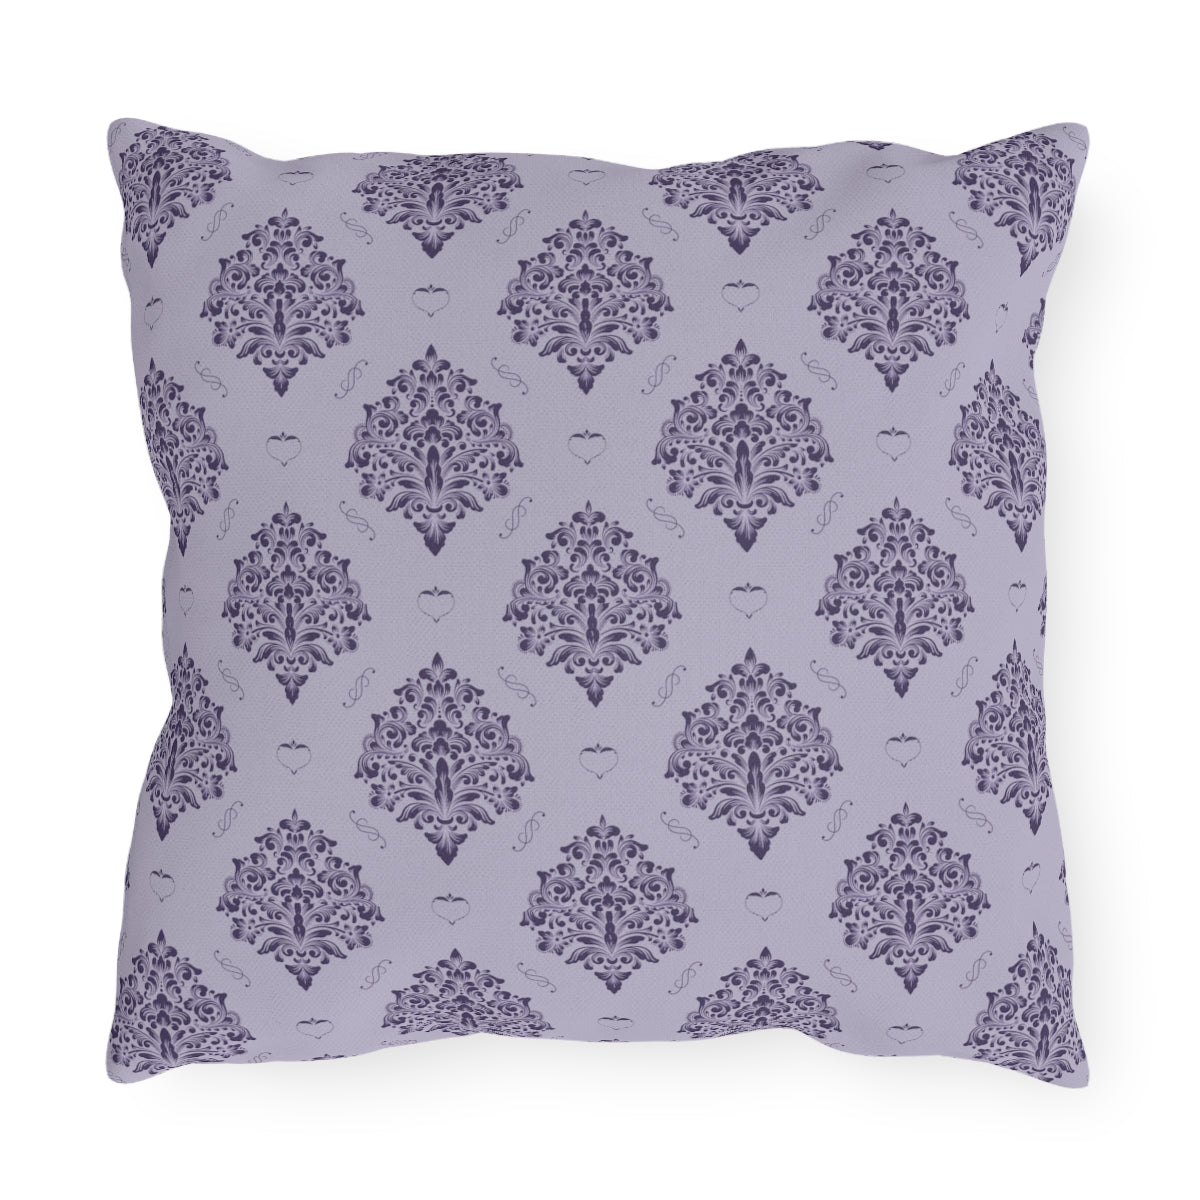 Purple Damask with Hearts on Heather Outdoor Pillows